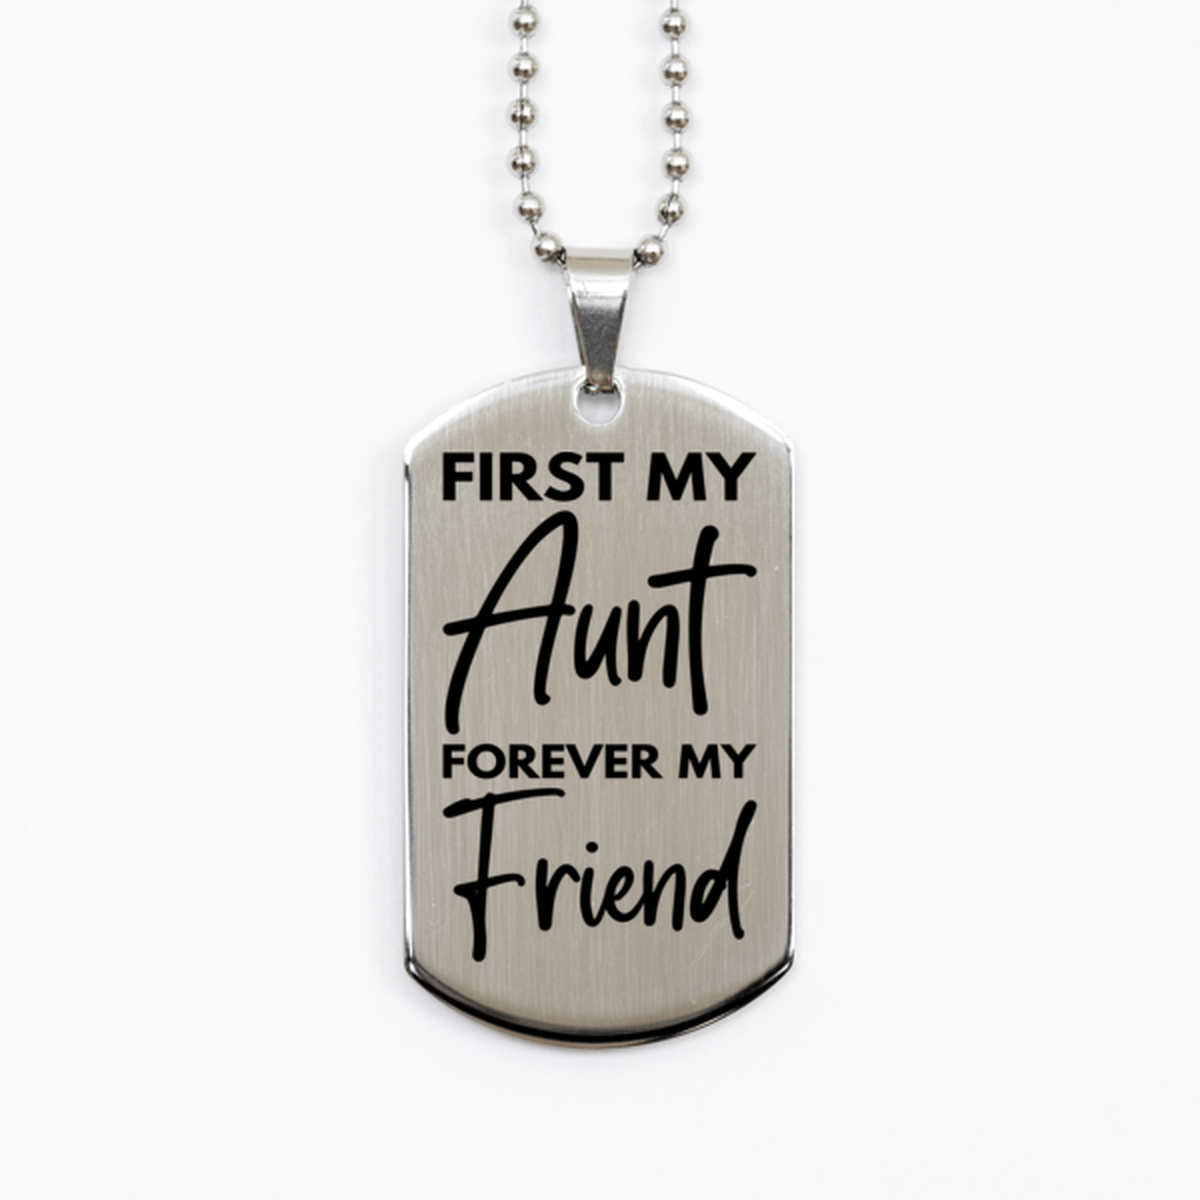 Inspirational Aunt Silver Dog Tag Necklace, First My Aunt Forever My Friend, Best Birthday Gifts for Aunt